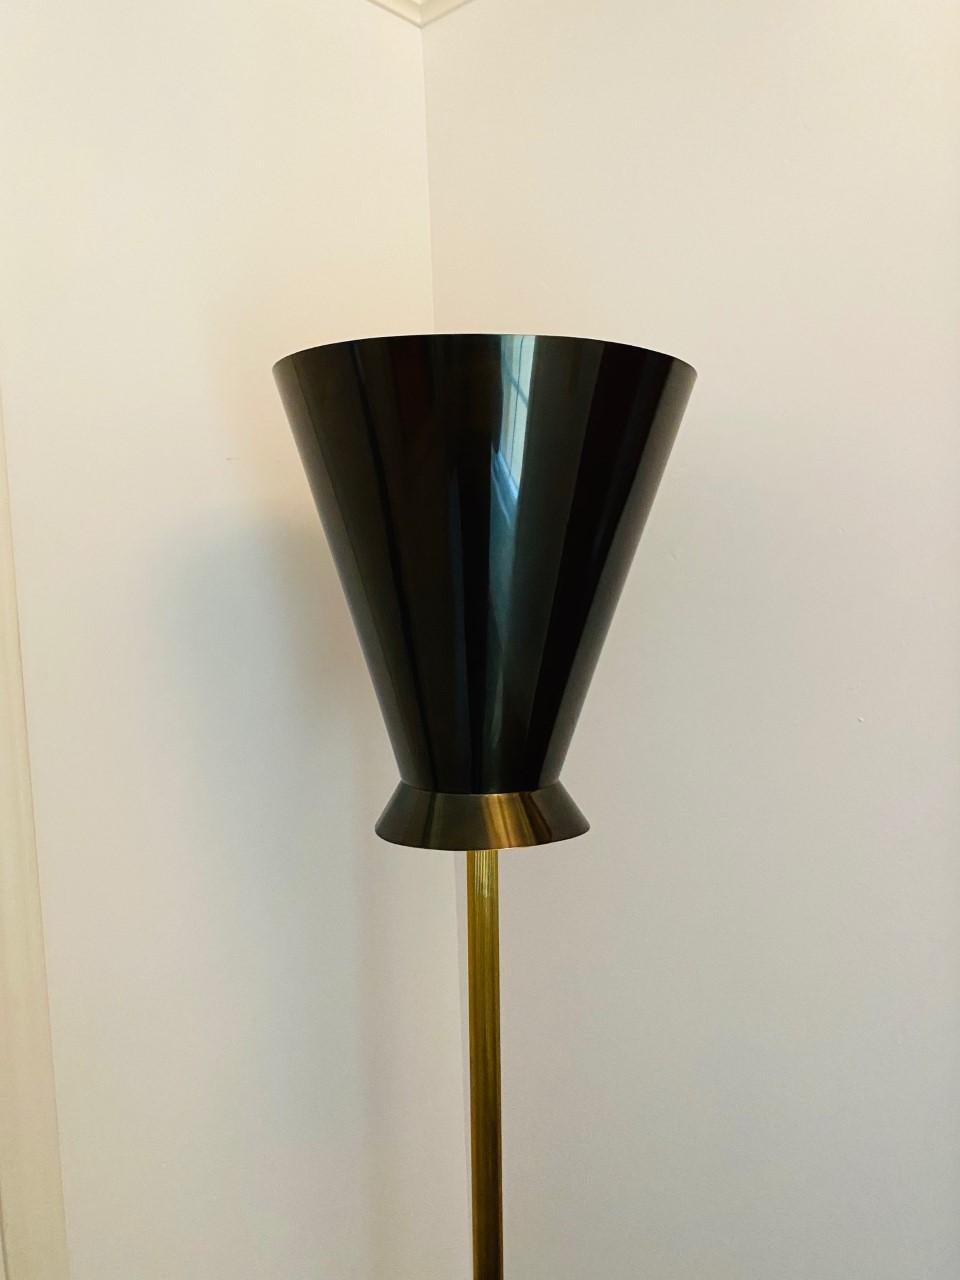 Vintage Rare Mid Century Hollywood Regency Torchiere Floor Lamp For Sale 2